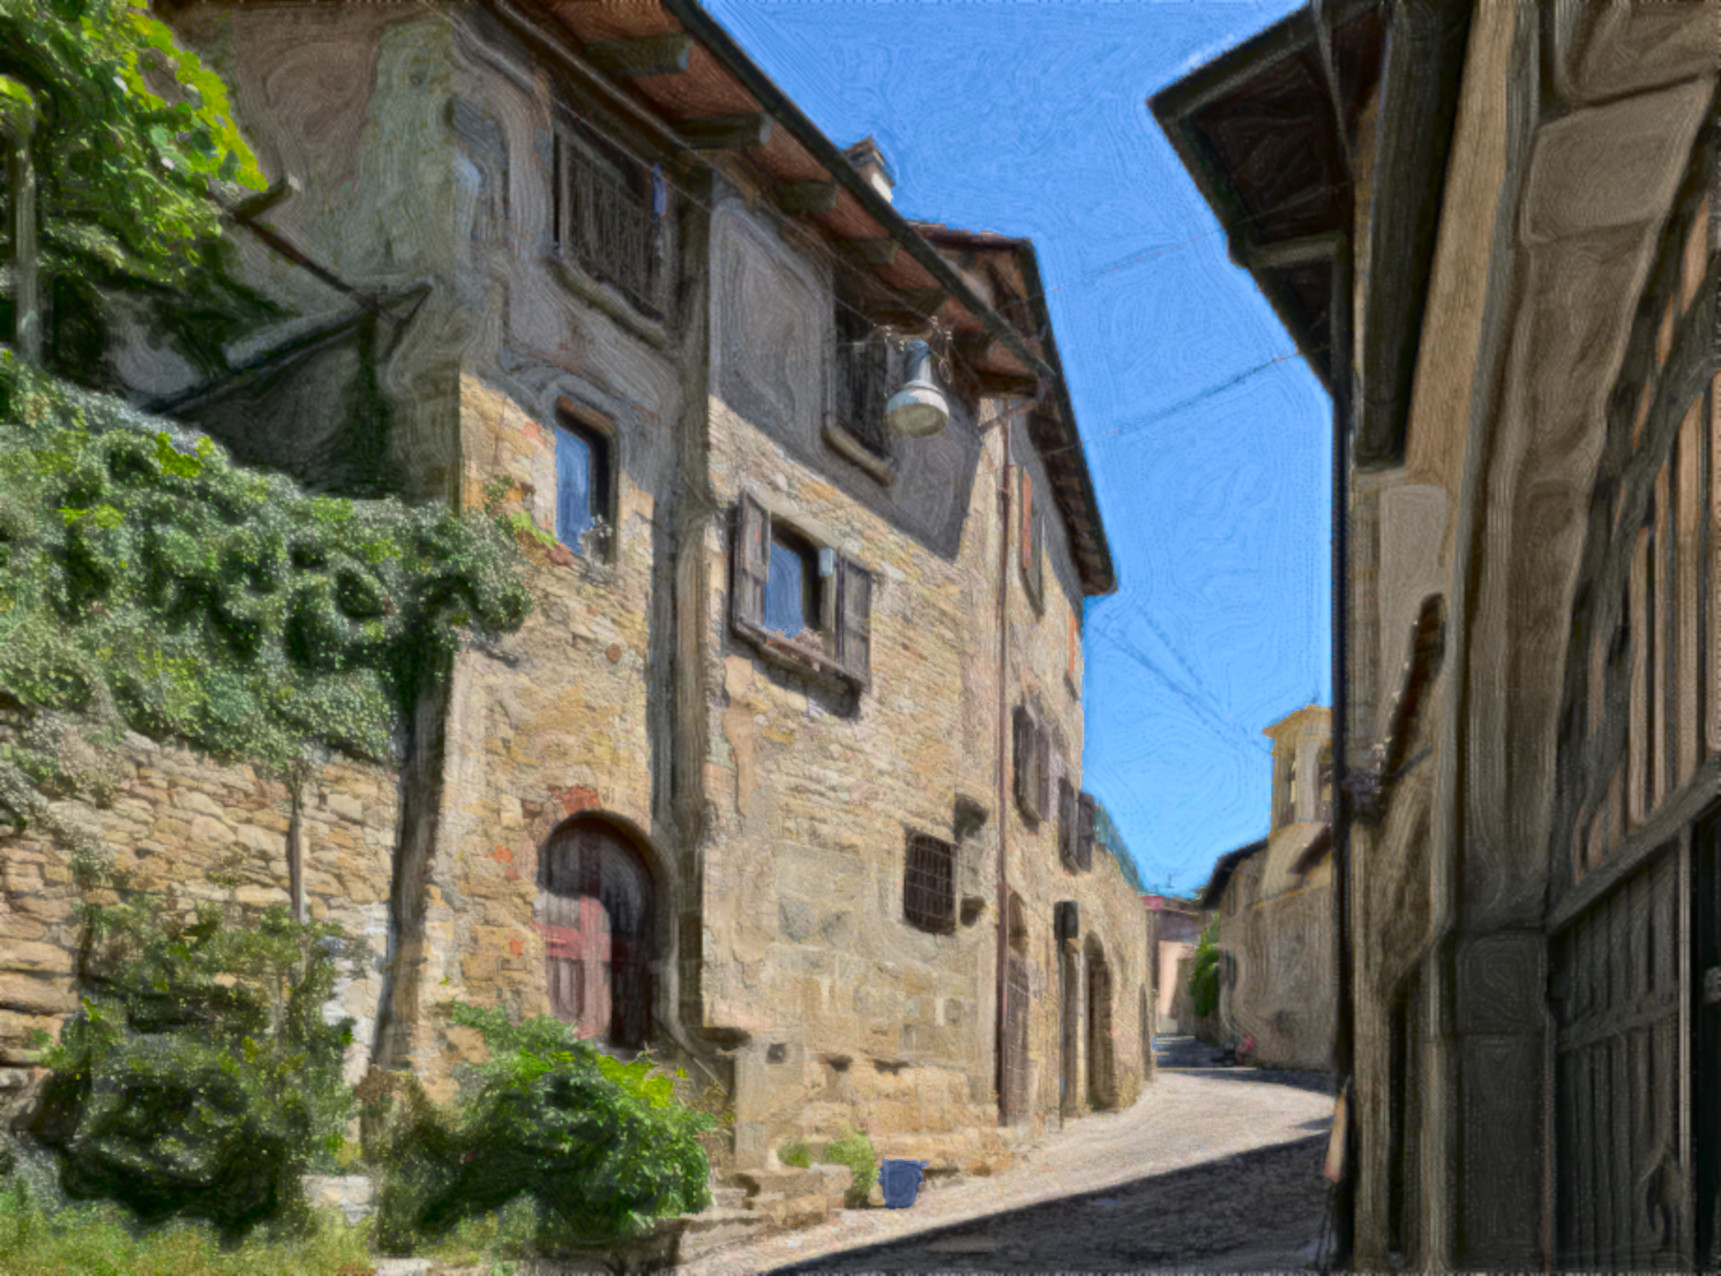 2022-04-11 16-57-05borgo_canale_by_sergiba_den4kq3-fullview Paint  with Couleurs Rayees 2 (Effect Look fine).jpeg